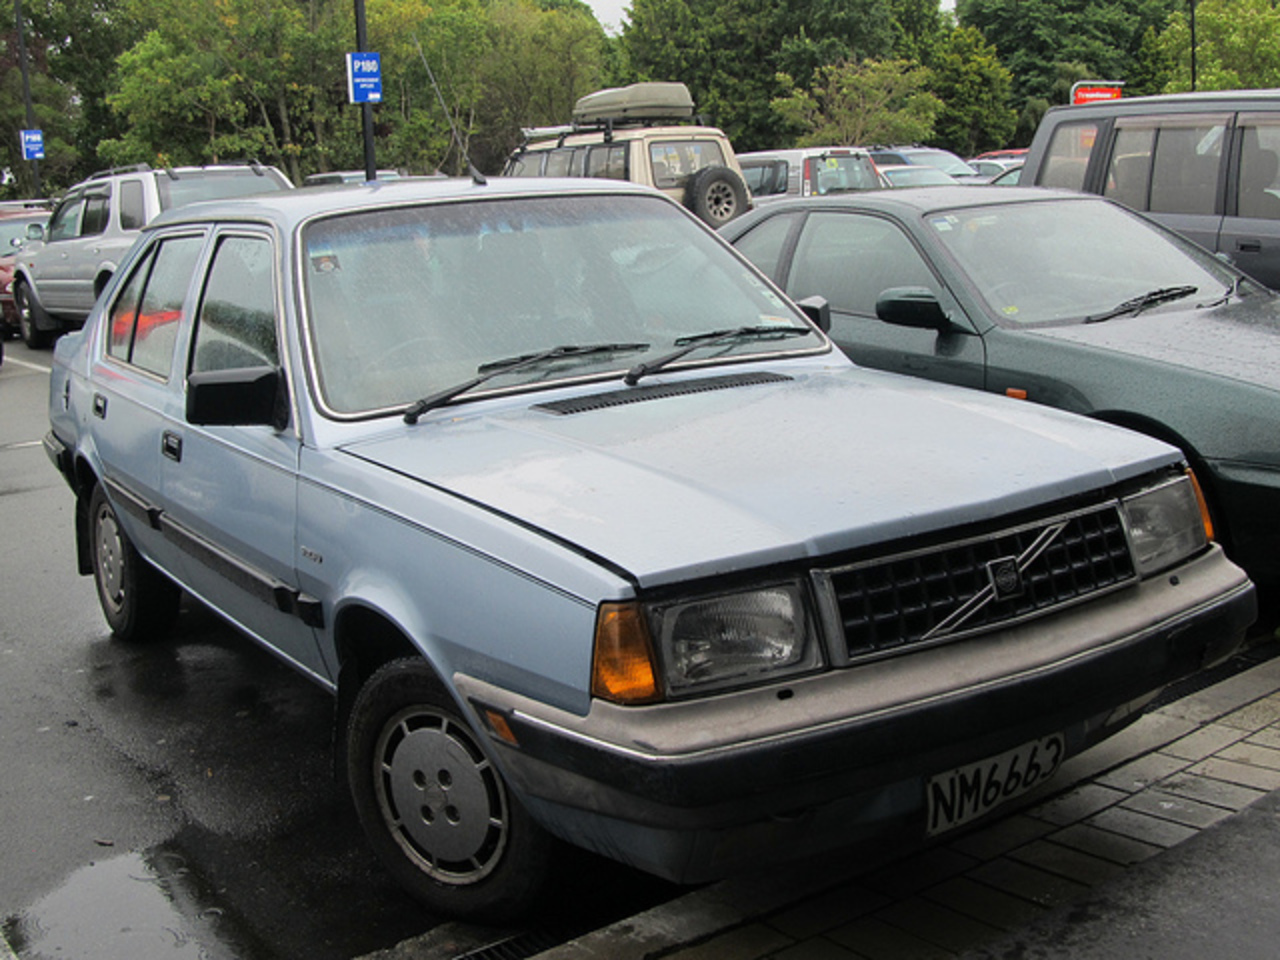 1987 Volvo 360 GLE Saloon. NM6663 These are still an occasional sight in NZ,